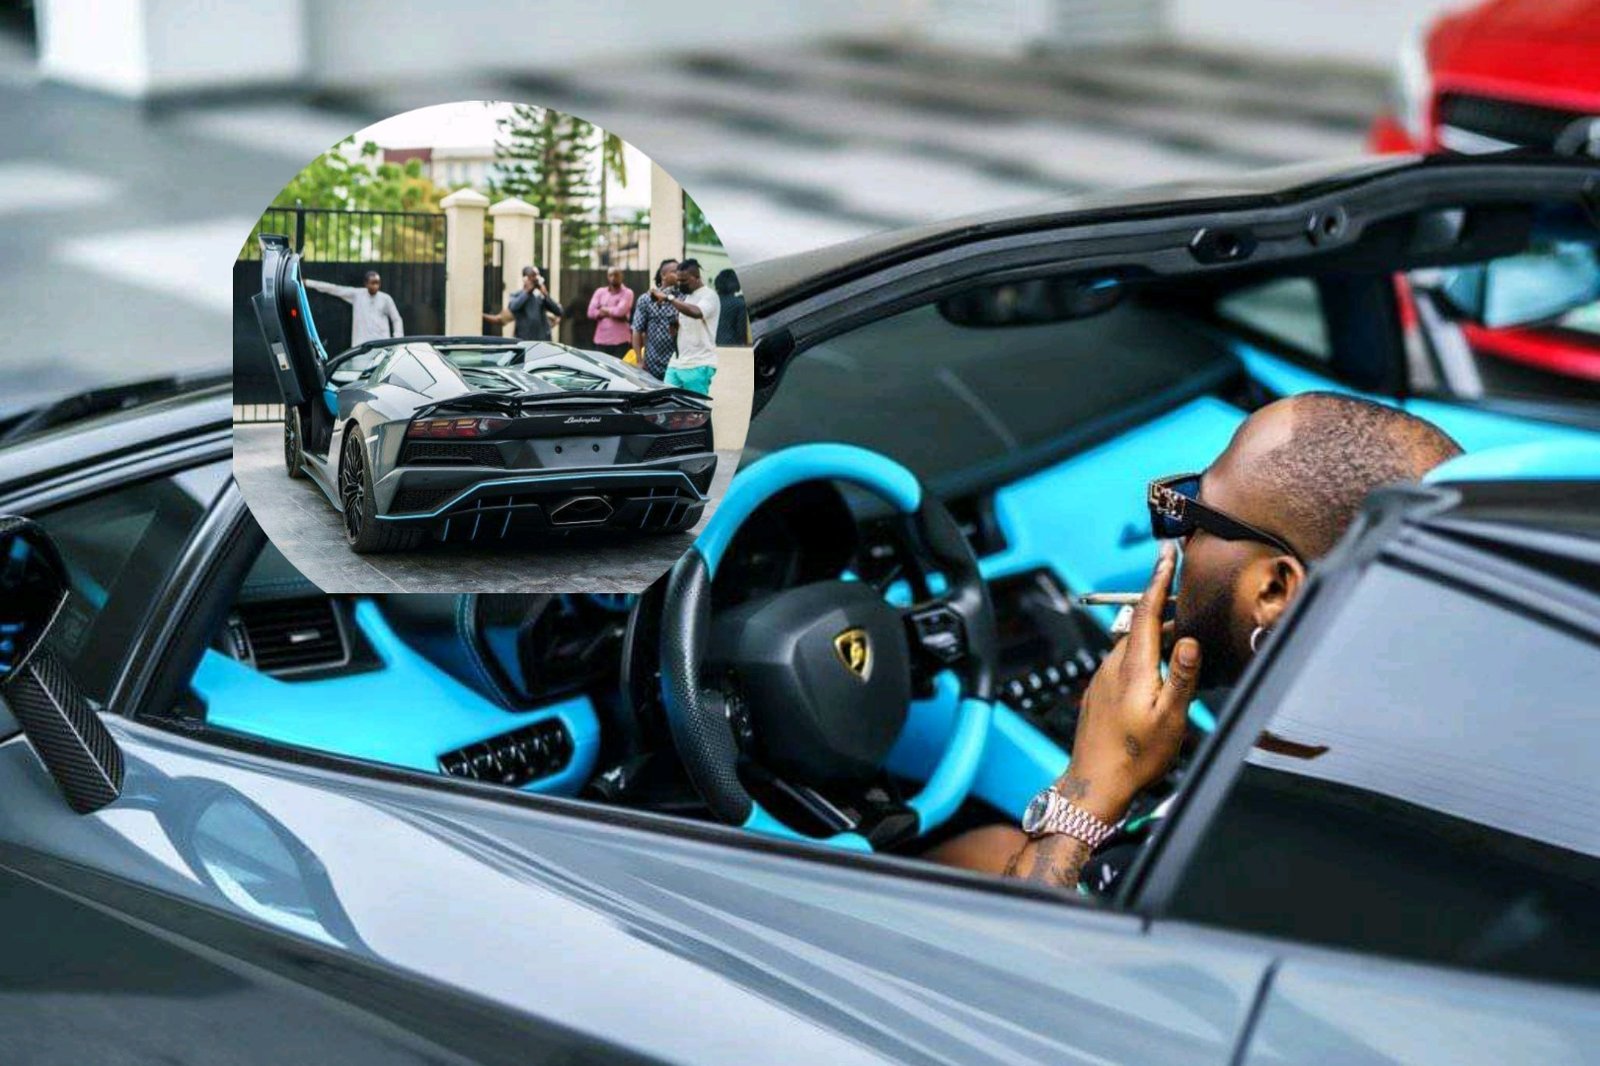 "OBO, Baddest, 30bg!!" – Moment car dealer screams after seeing Davido Lamborghini for the first time in Lagos (VIDEO)